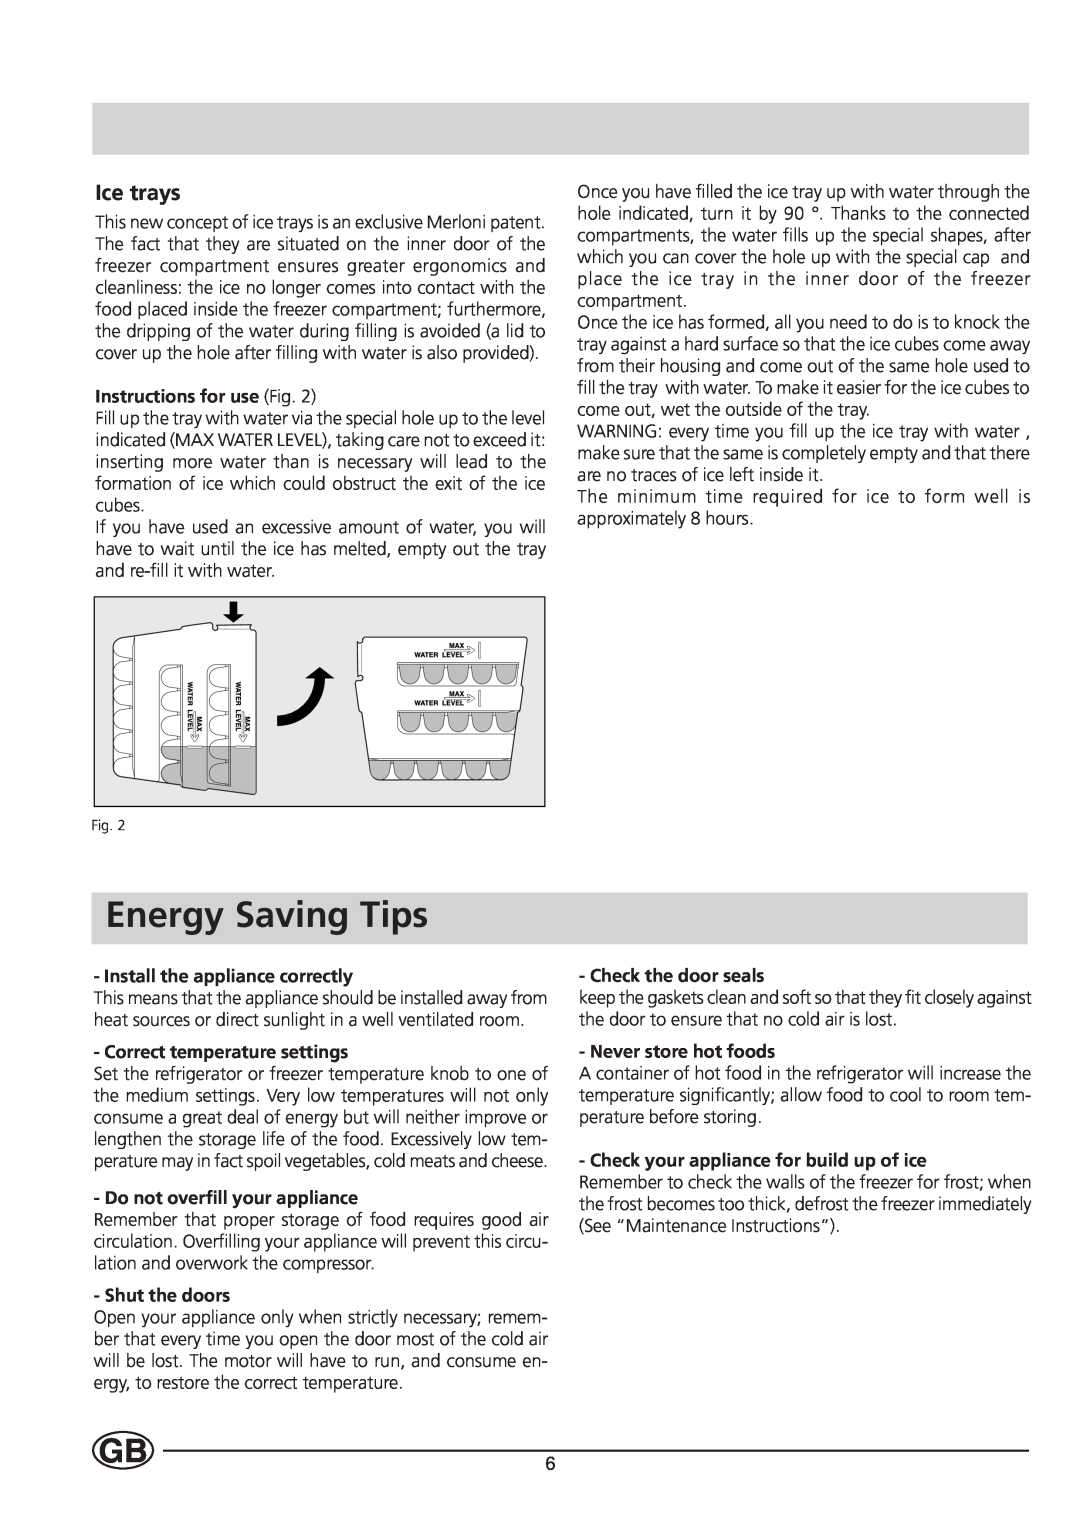 Indesit BA 139 S Energy Saving Tips, Ice trays, Instructions for use Fig, Install the appliance correctly, Shut the doors 